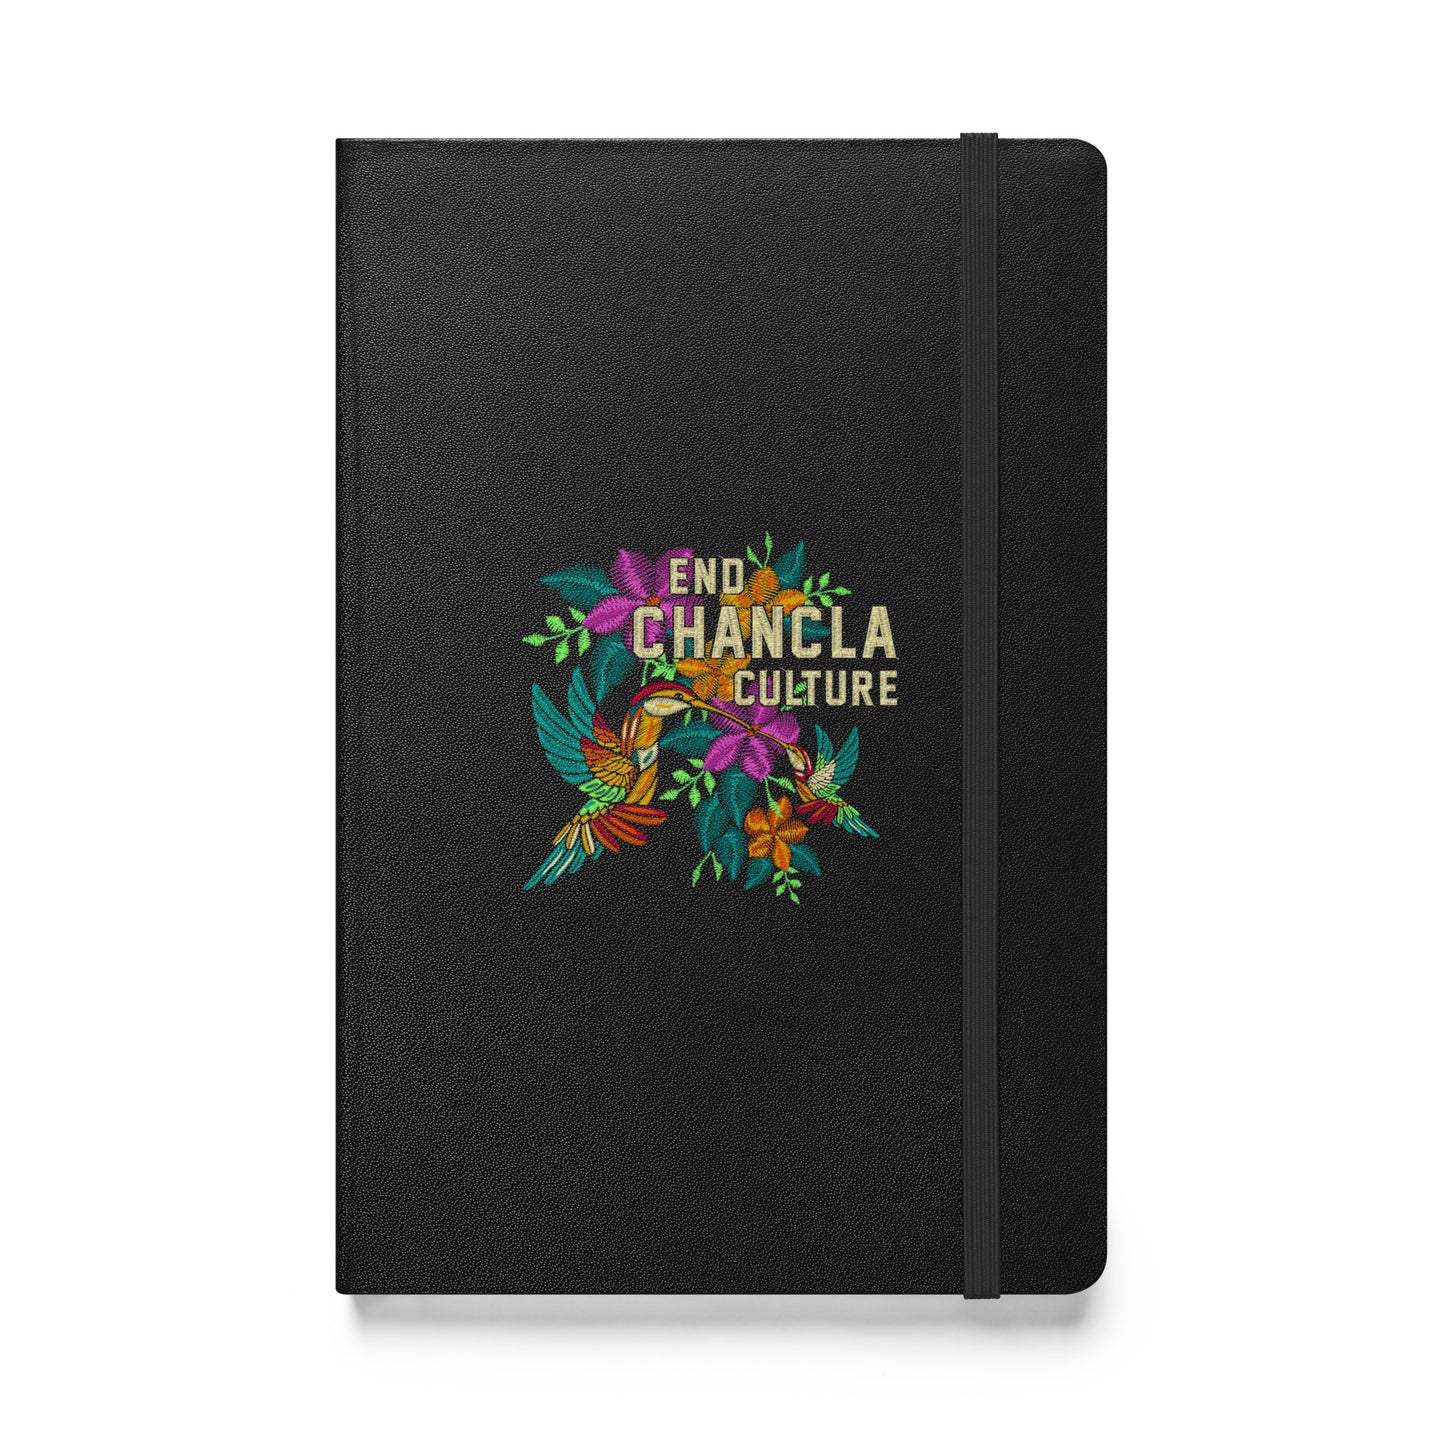 End Chancla Culture Hardcover Bound Notebook